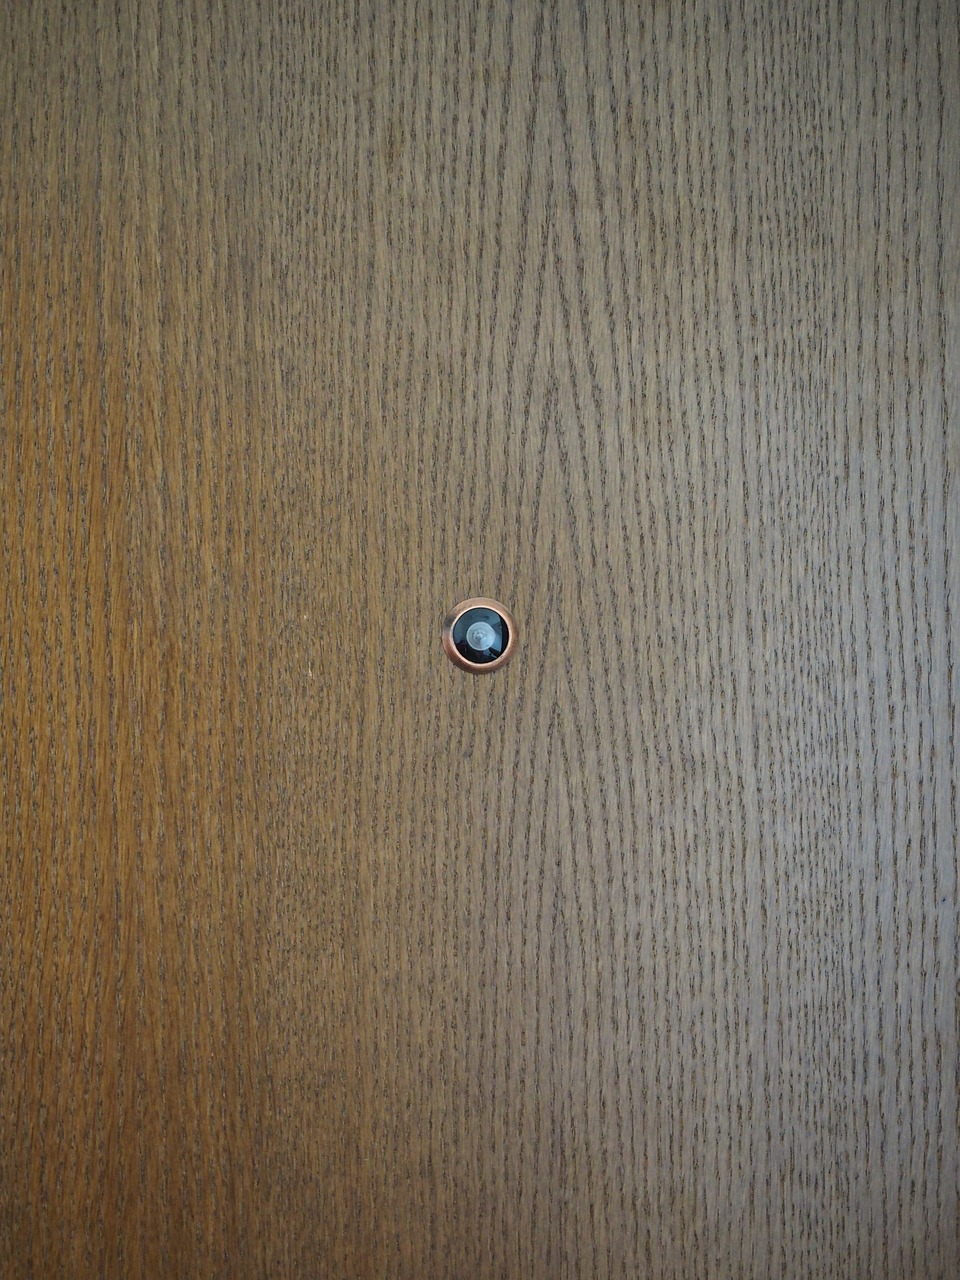 a brown wooden door with a blue round on on it